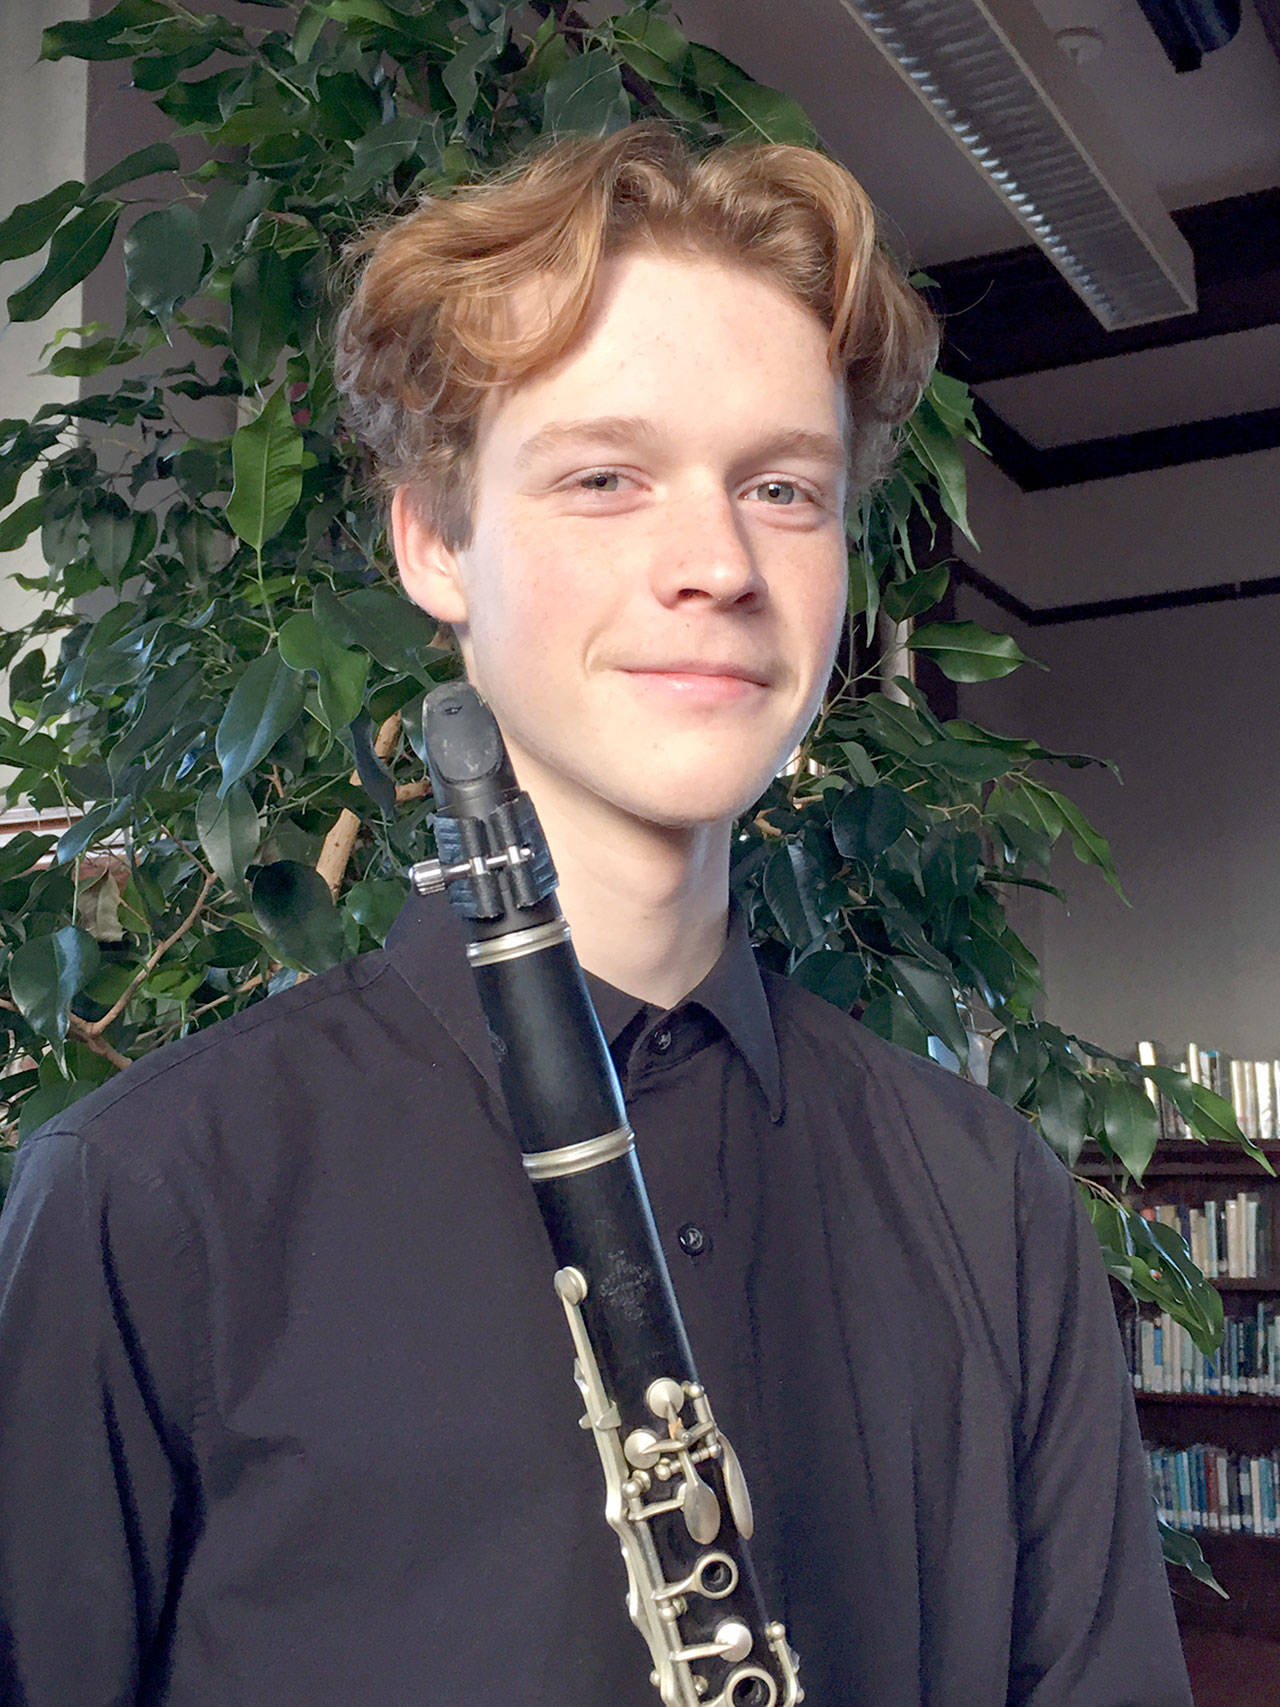 Kincaid Gould will be the guest soloist with the Port Townsend Symphony Orchestra on Sunday in Chimacum.